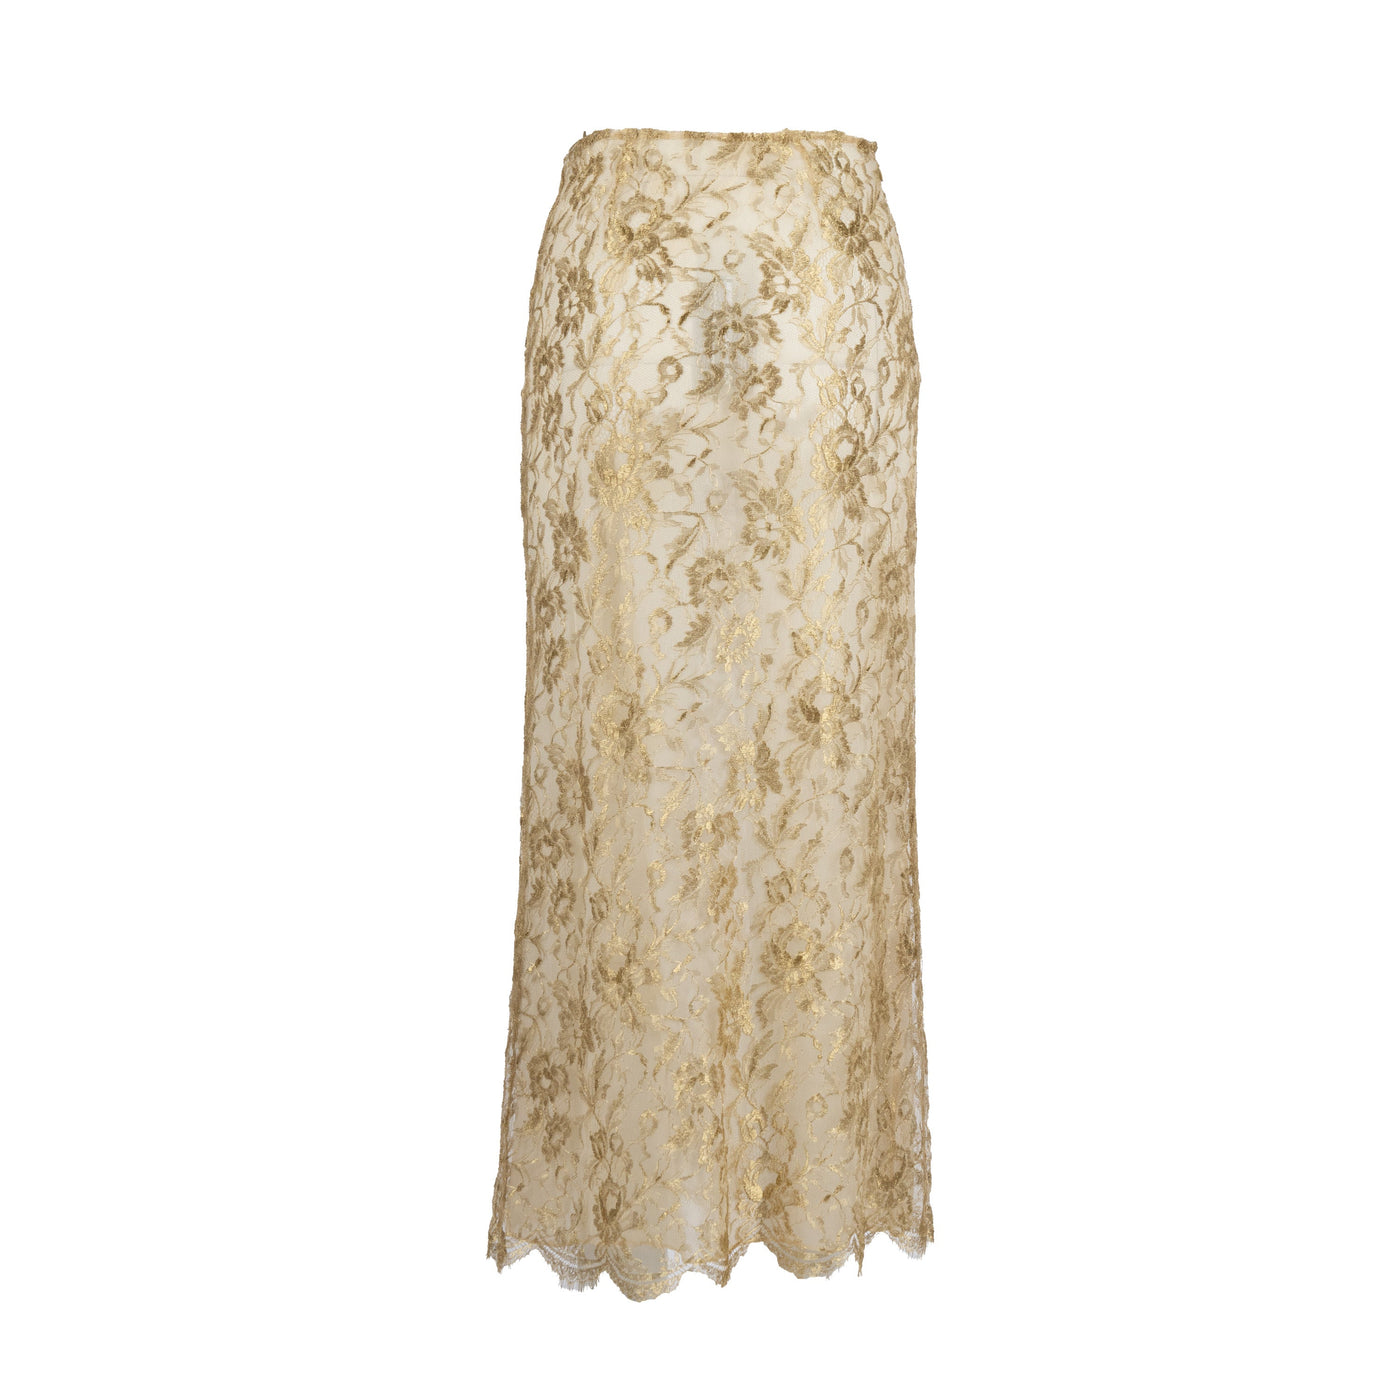 Secondhand Collection Privée Shimmer Lace Skirt 